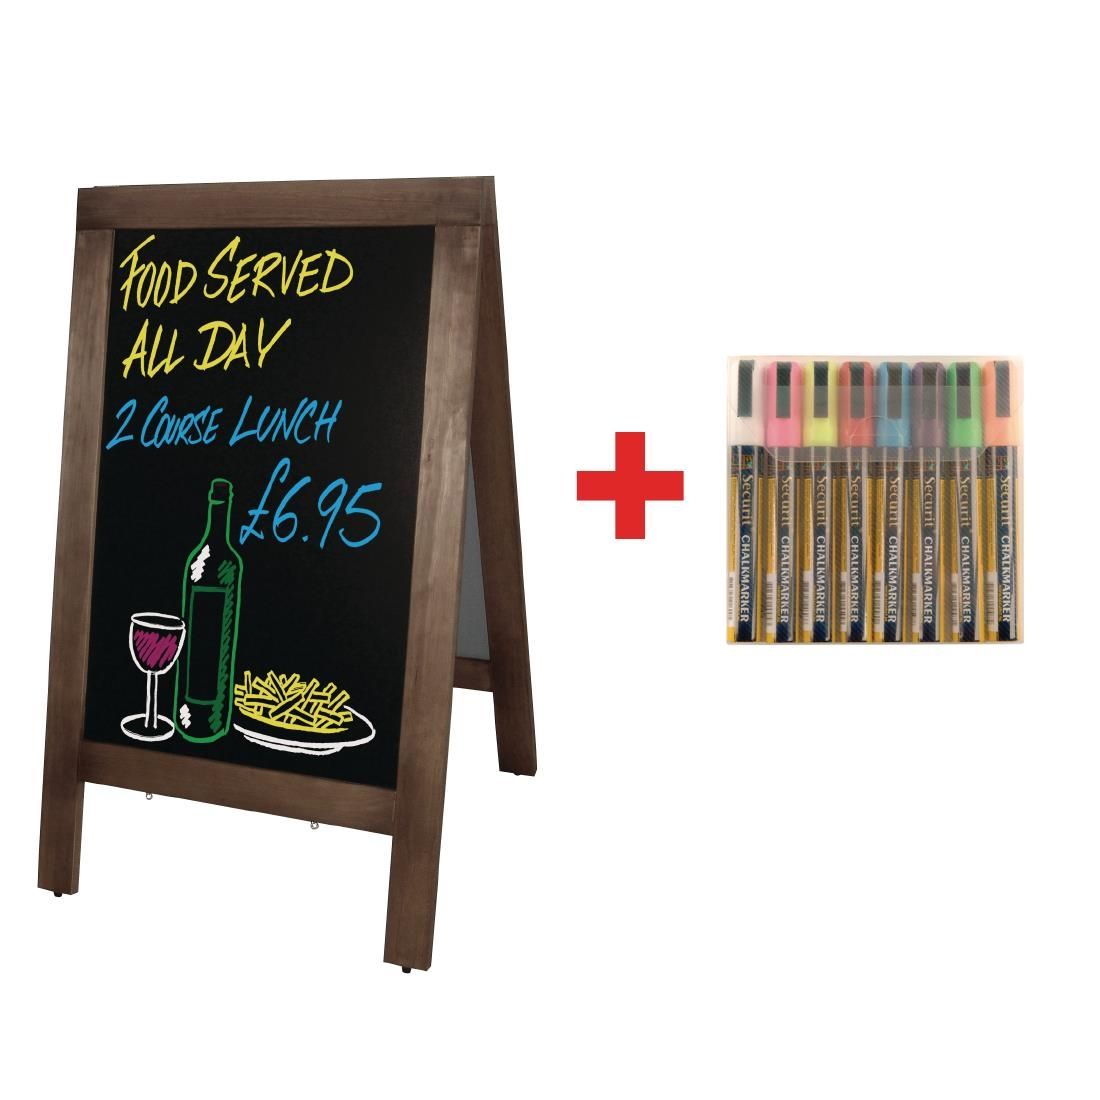 SA228 Olympia Small Pavement Board and FREE Set of Securit Pens